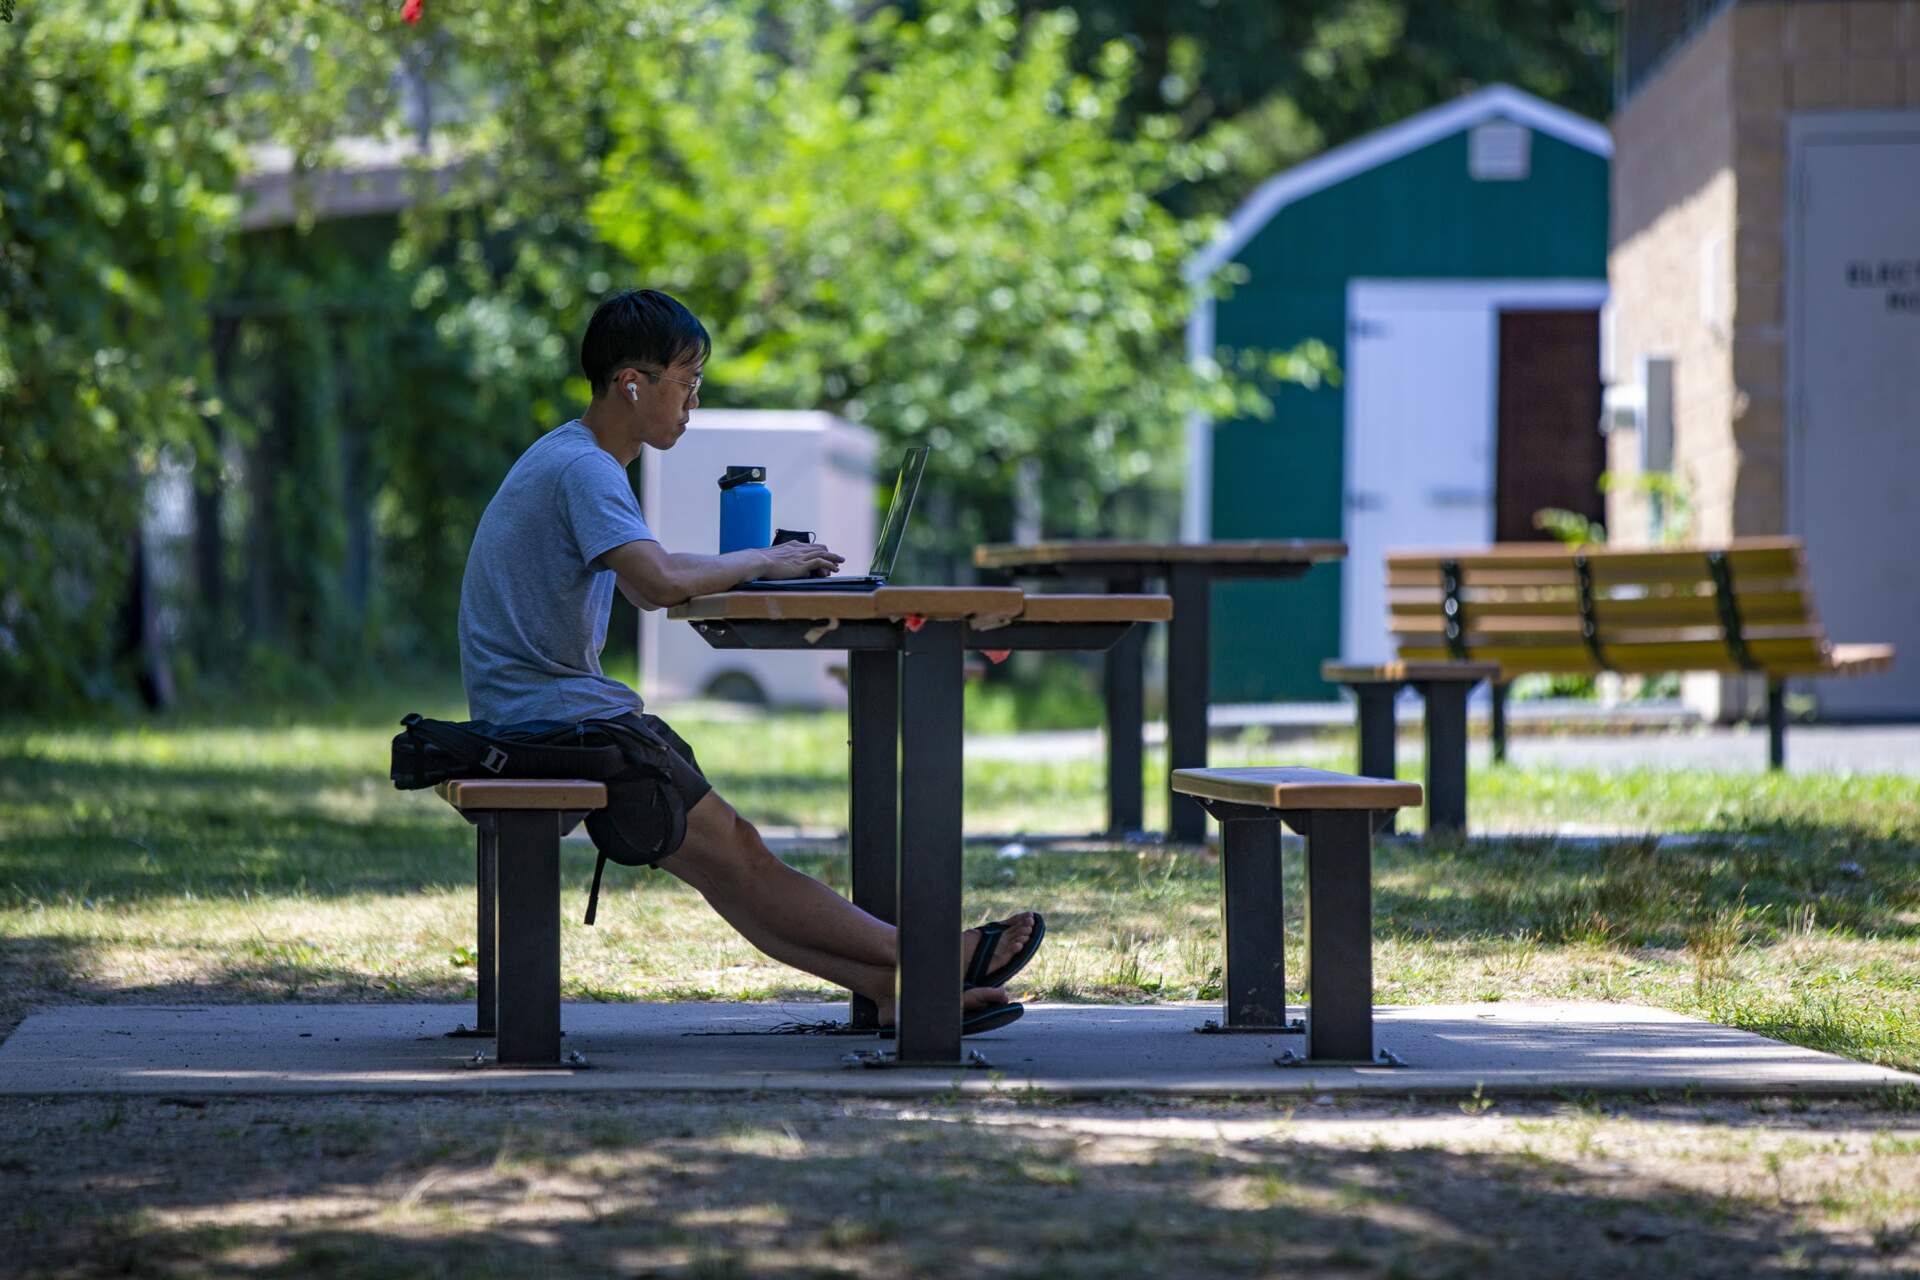 A young man works on a laptop in a shady area at Artesani Playground in Allston. (Jesse Costa/WBUR)